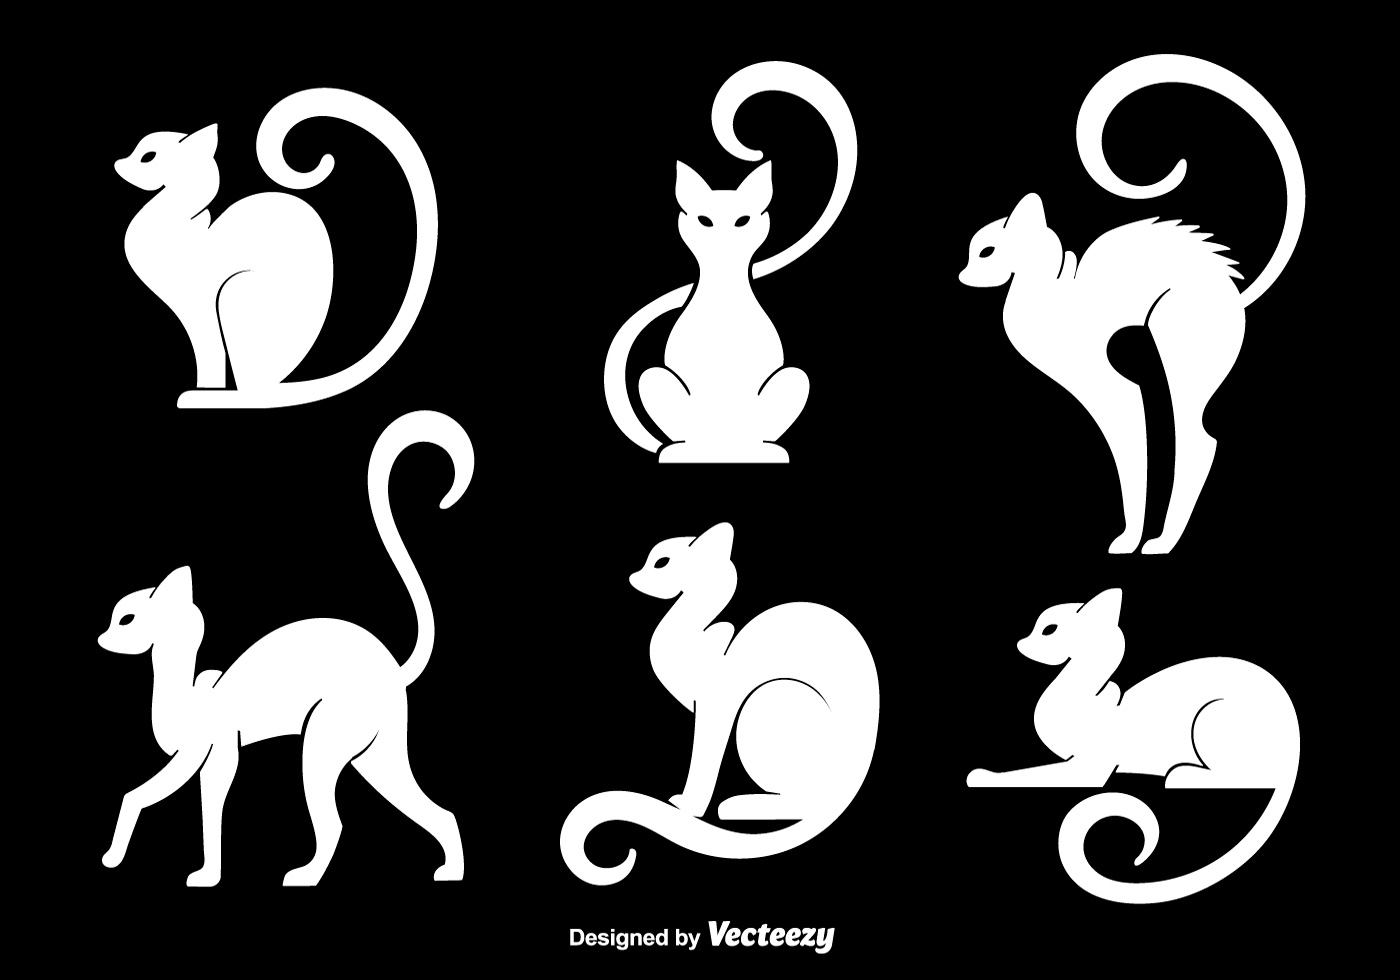 Download White cats silhouettes - Download Free Vector Art, Stock ...